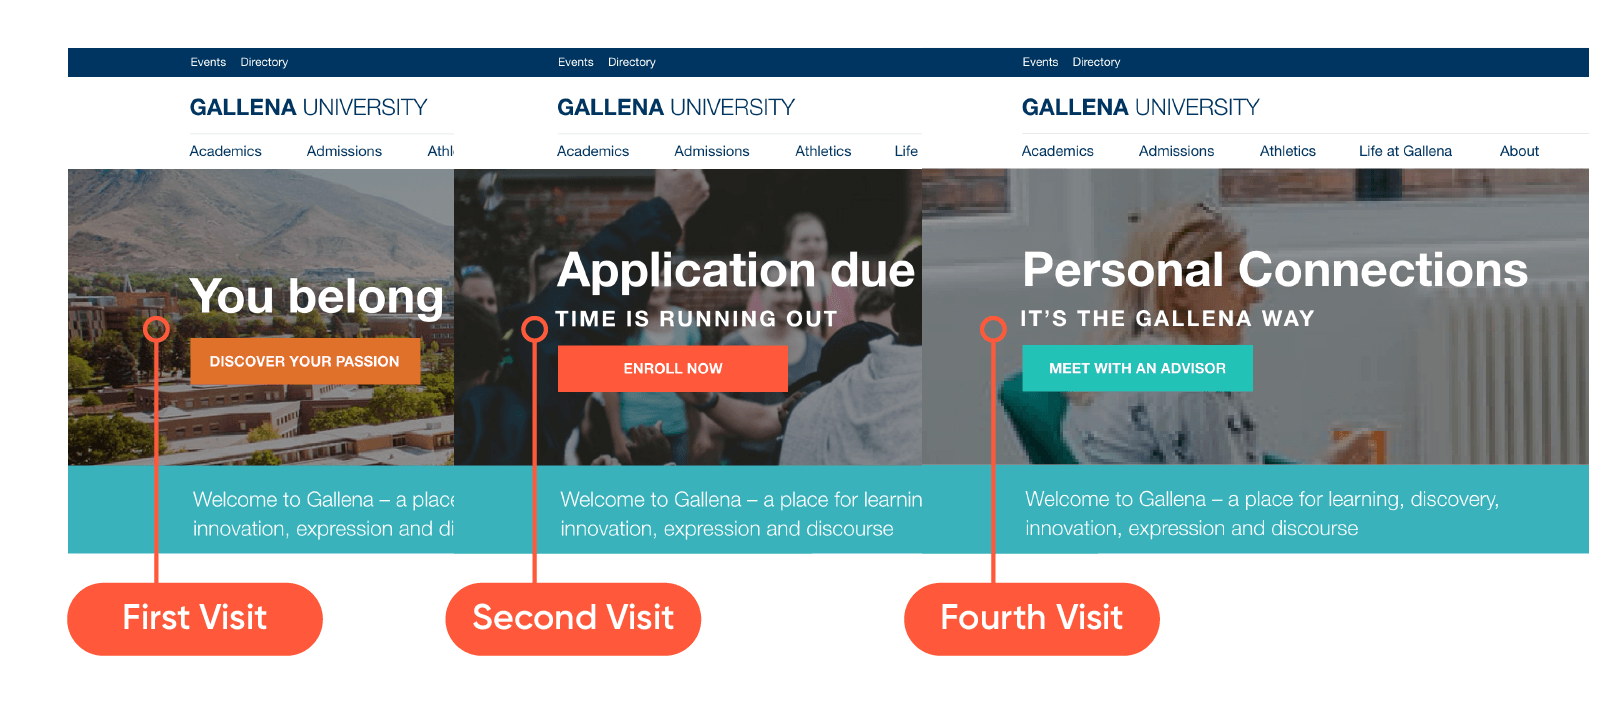 Display relevant calls to action on your higher educaiton website with Modern Campus personalization.